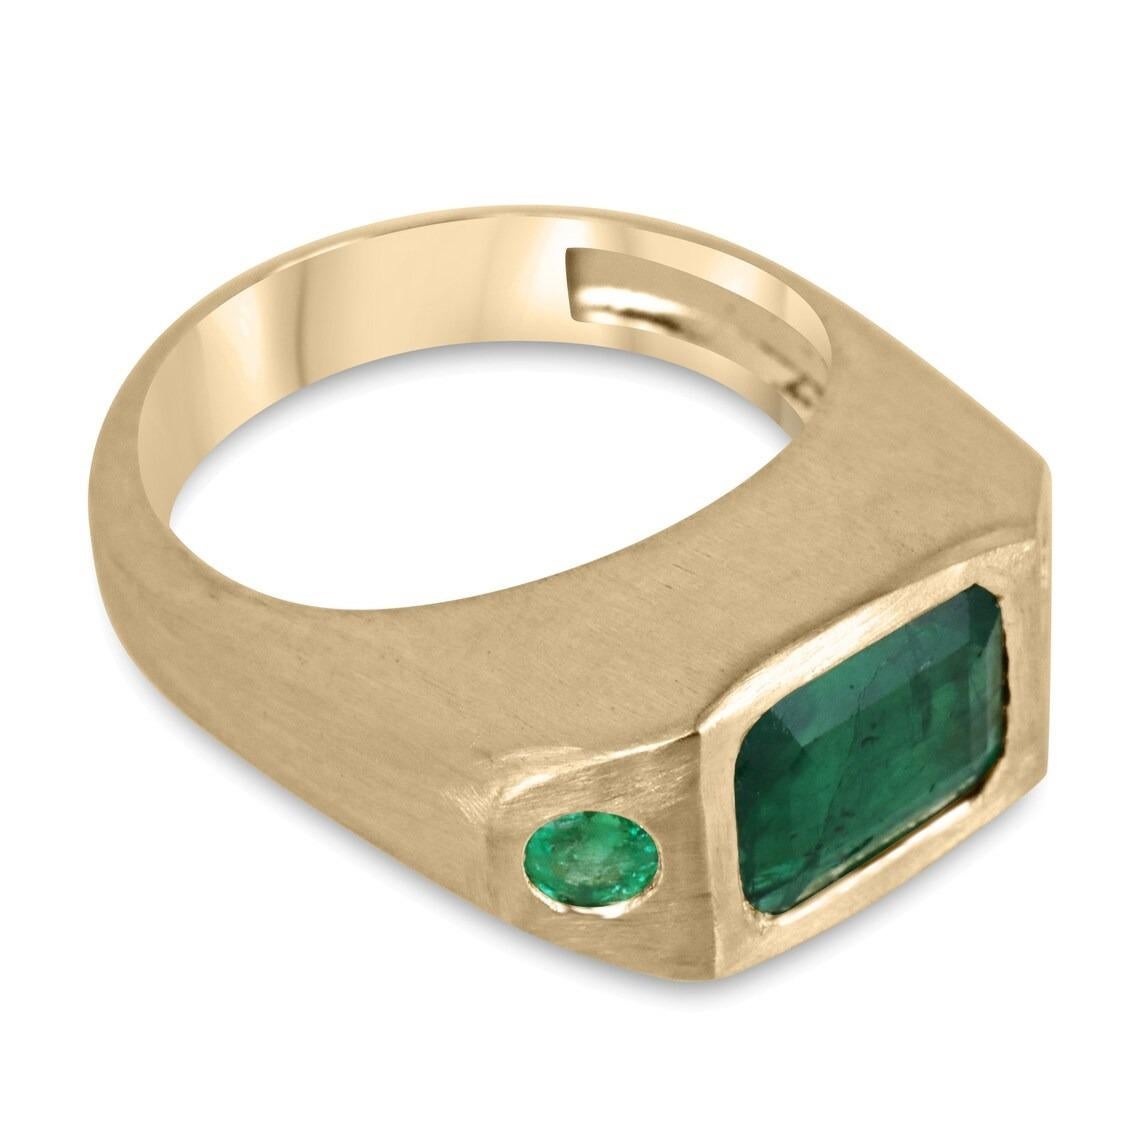 This gorgeous all-emerald three-stone ring is a true statement piece. The center of the ring boasts a stunning 3-carat natural emerald cut emerald from Zambia. On either side of the center stone, there are two smaller round-cut emeralds that